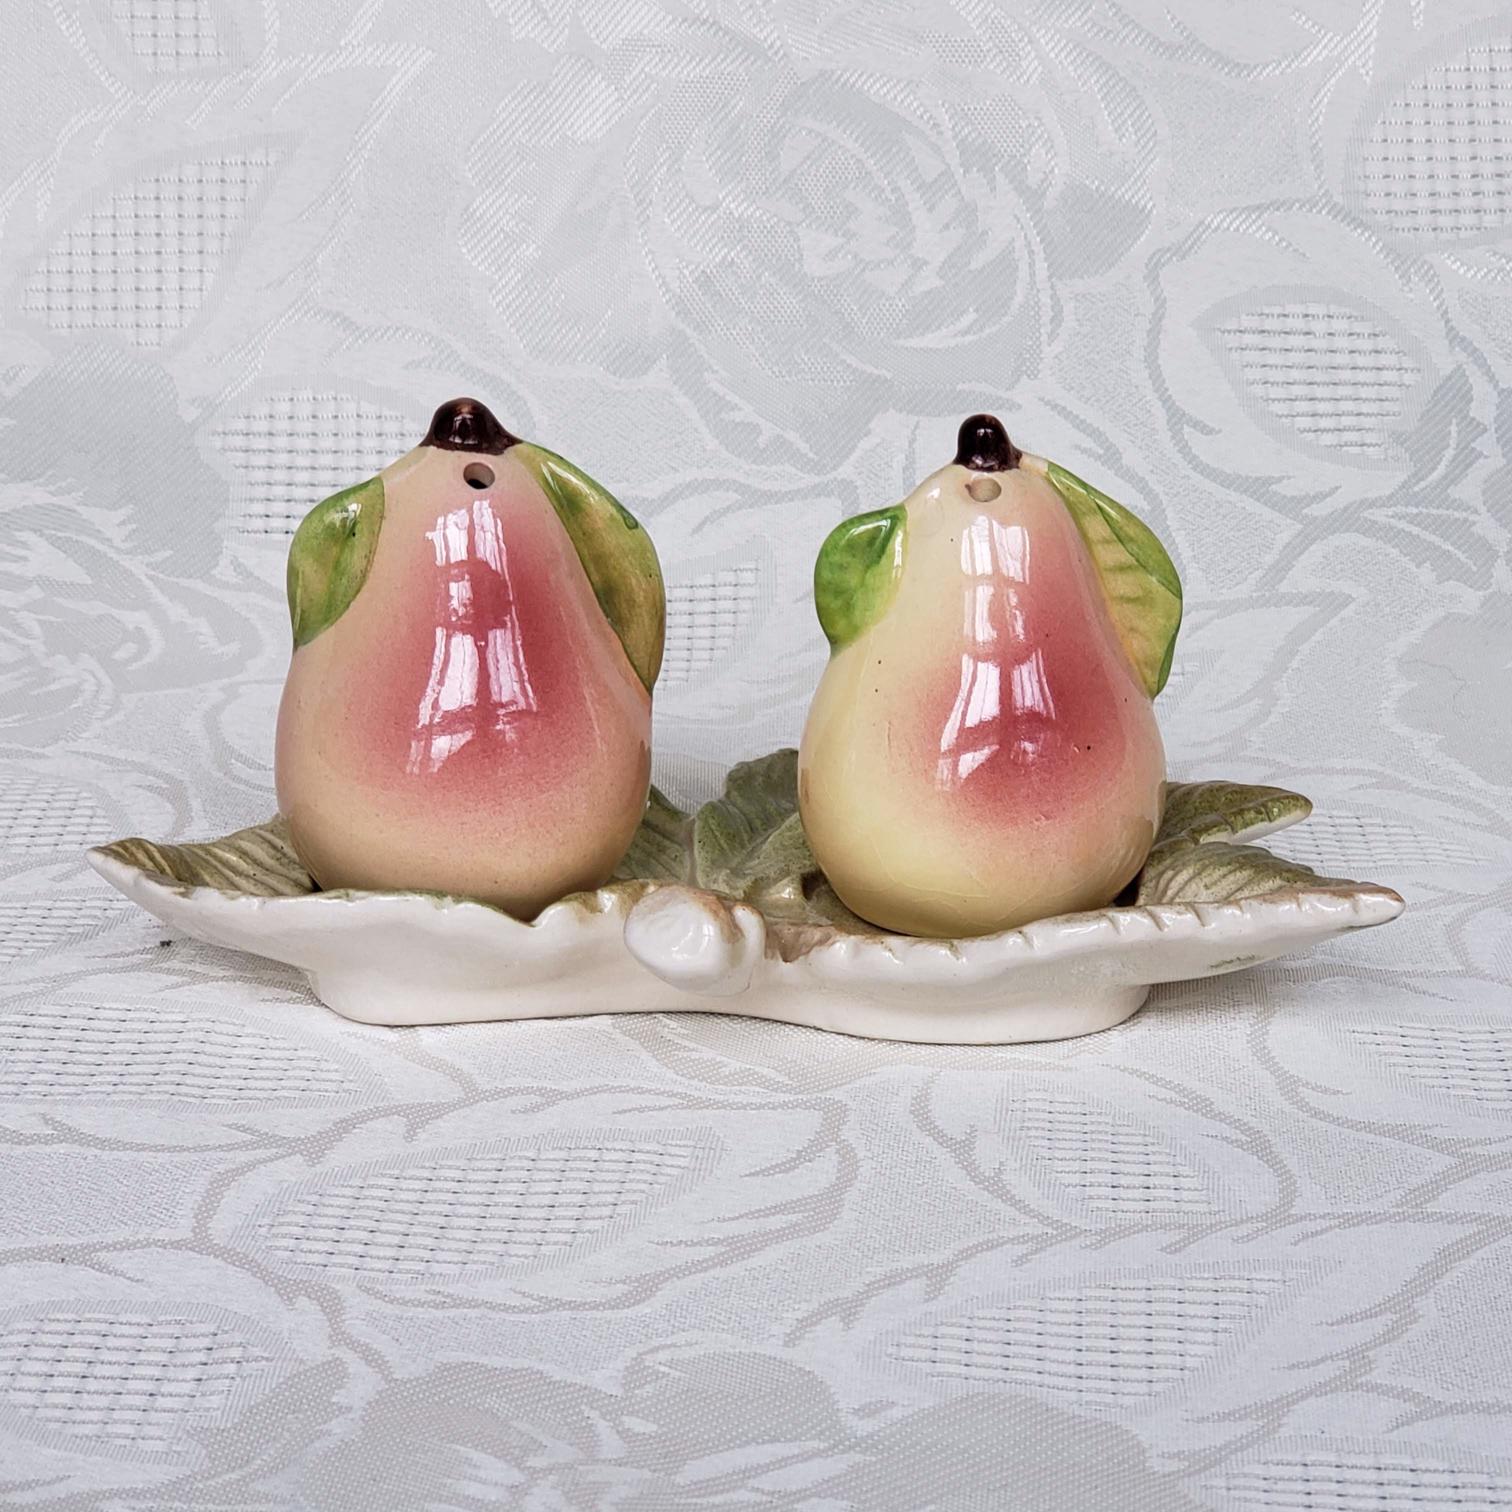 https://serstyle.com/wp-content/uploads/2020/01/Pear-Salt-and-Pepper-Shakers-with-Caddy.jpg